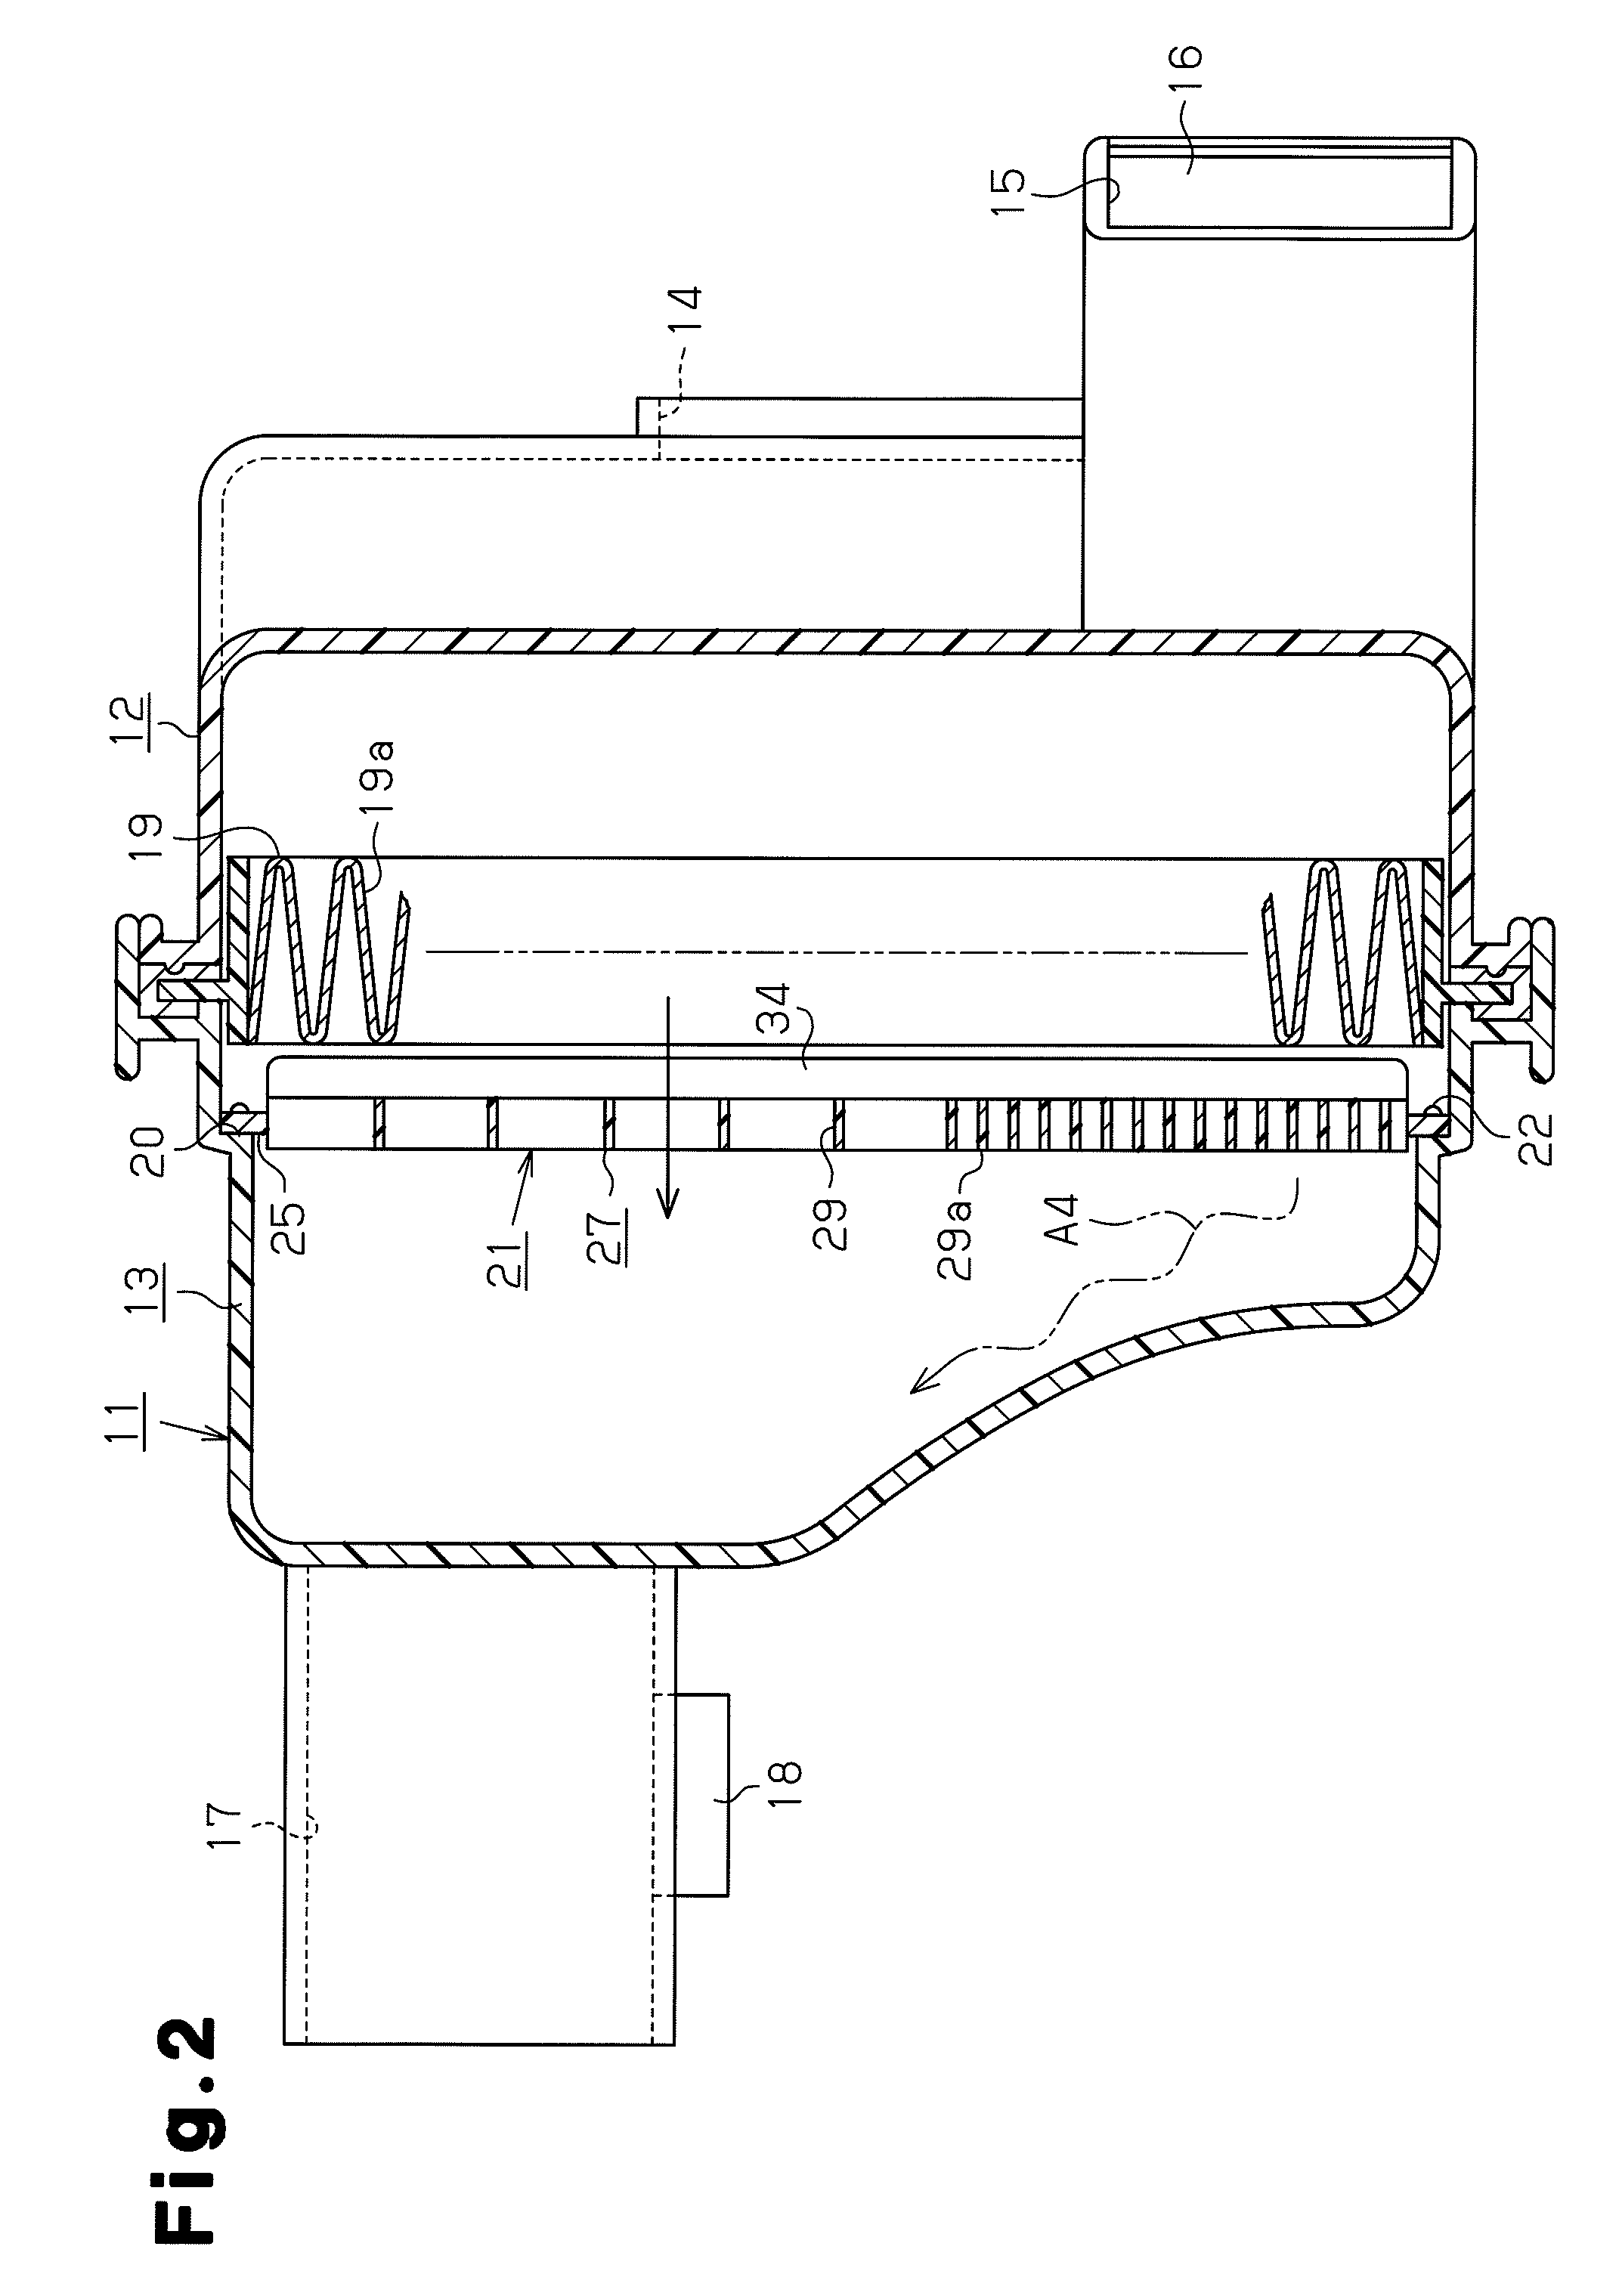 Fuel adsorption filter and air cleaner